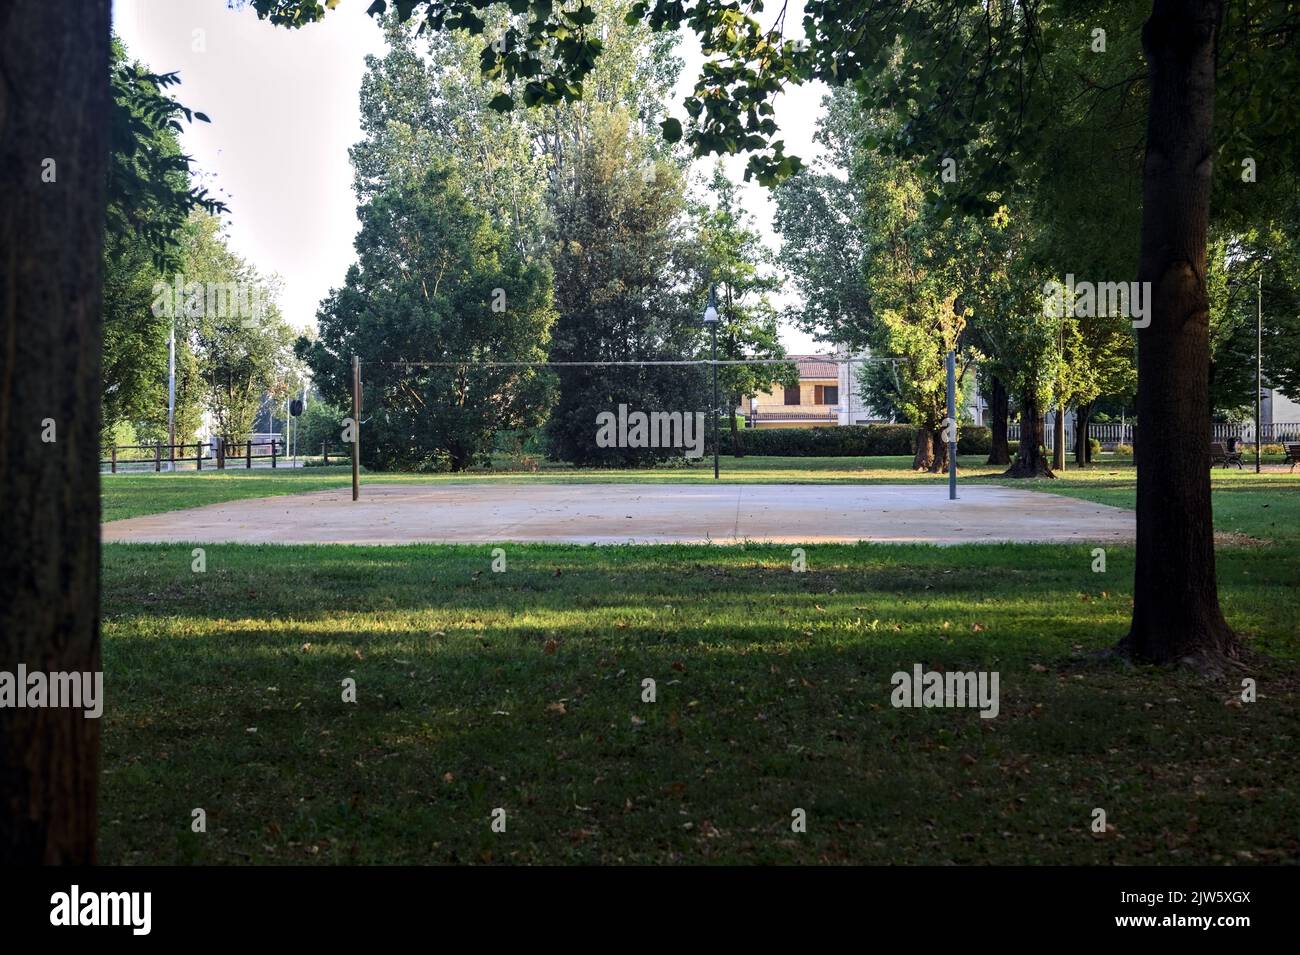 Volleyball  field in a public park Stock Photo